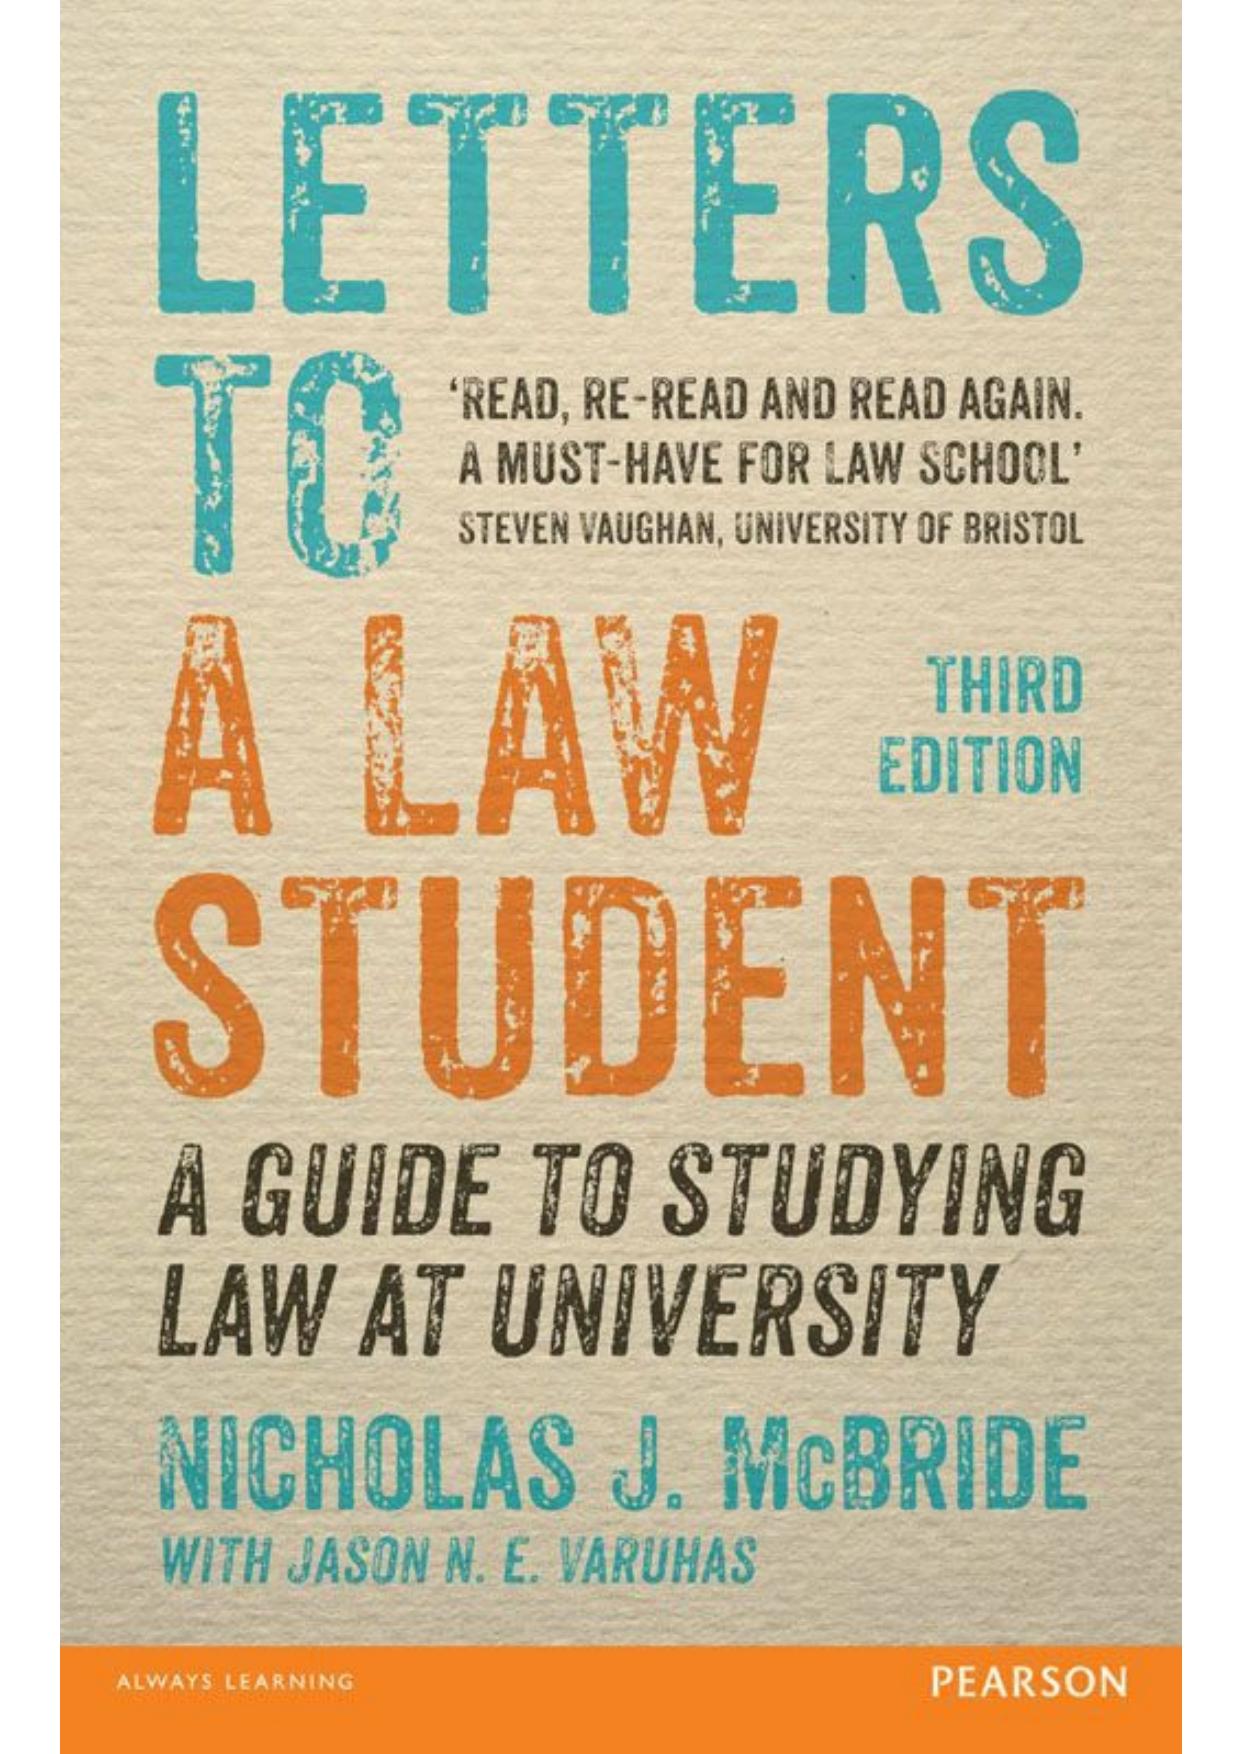 Letters to a Law Student 3rd edn: A guide to studying law at university